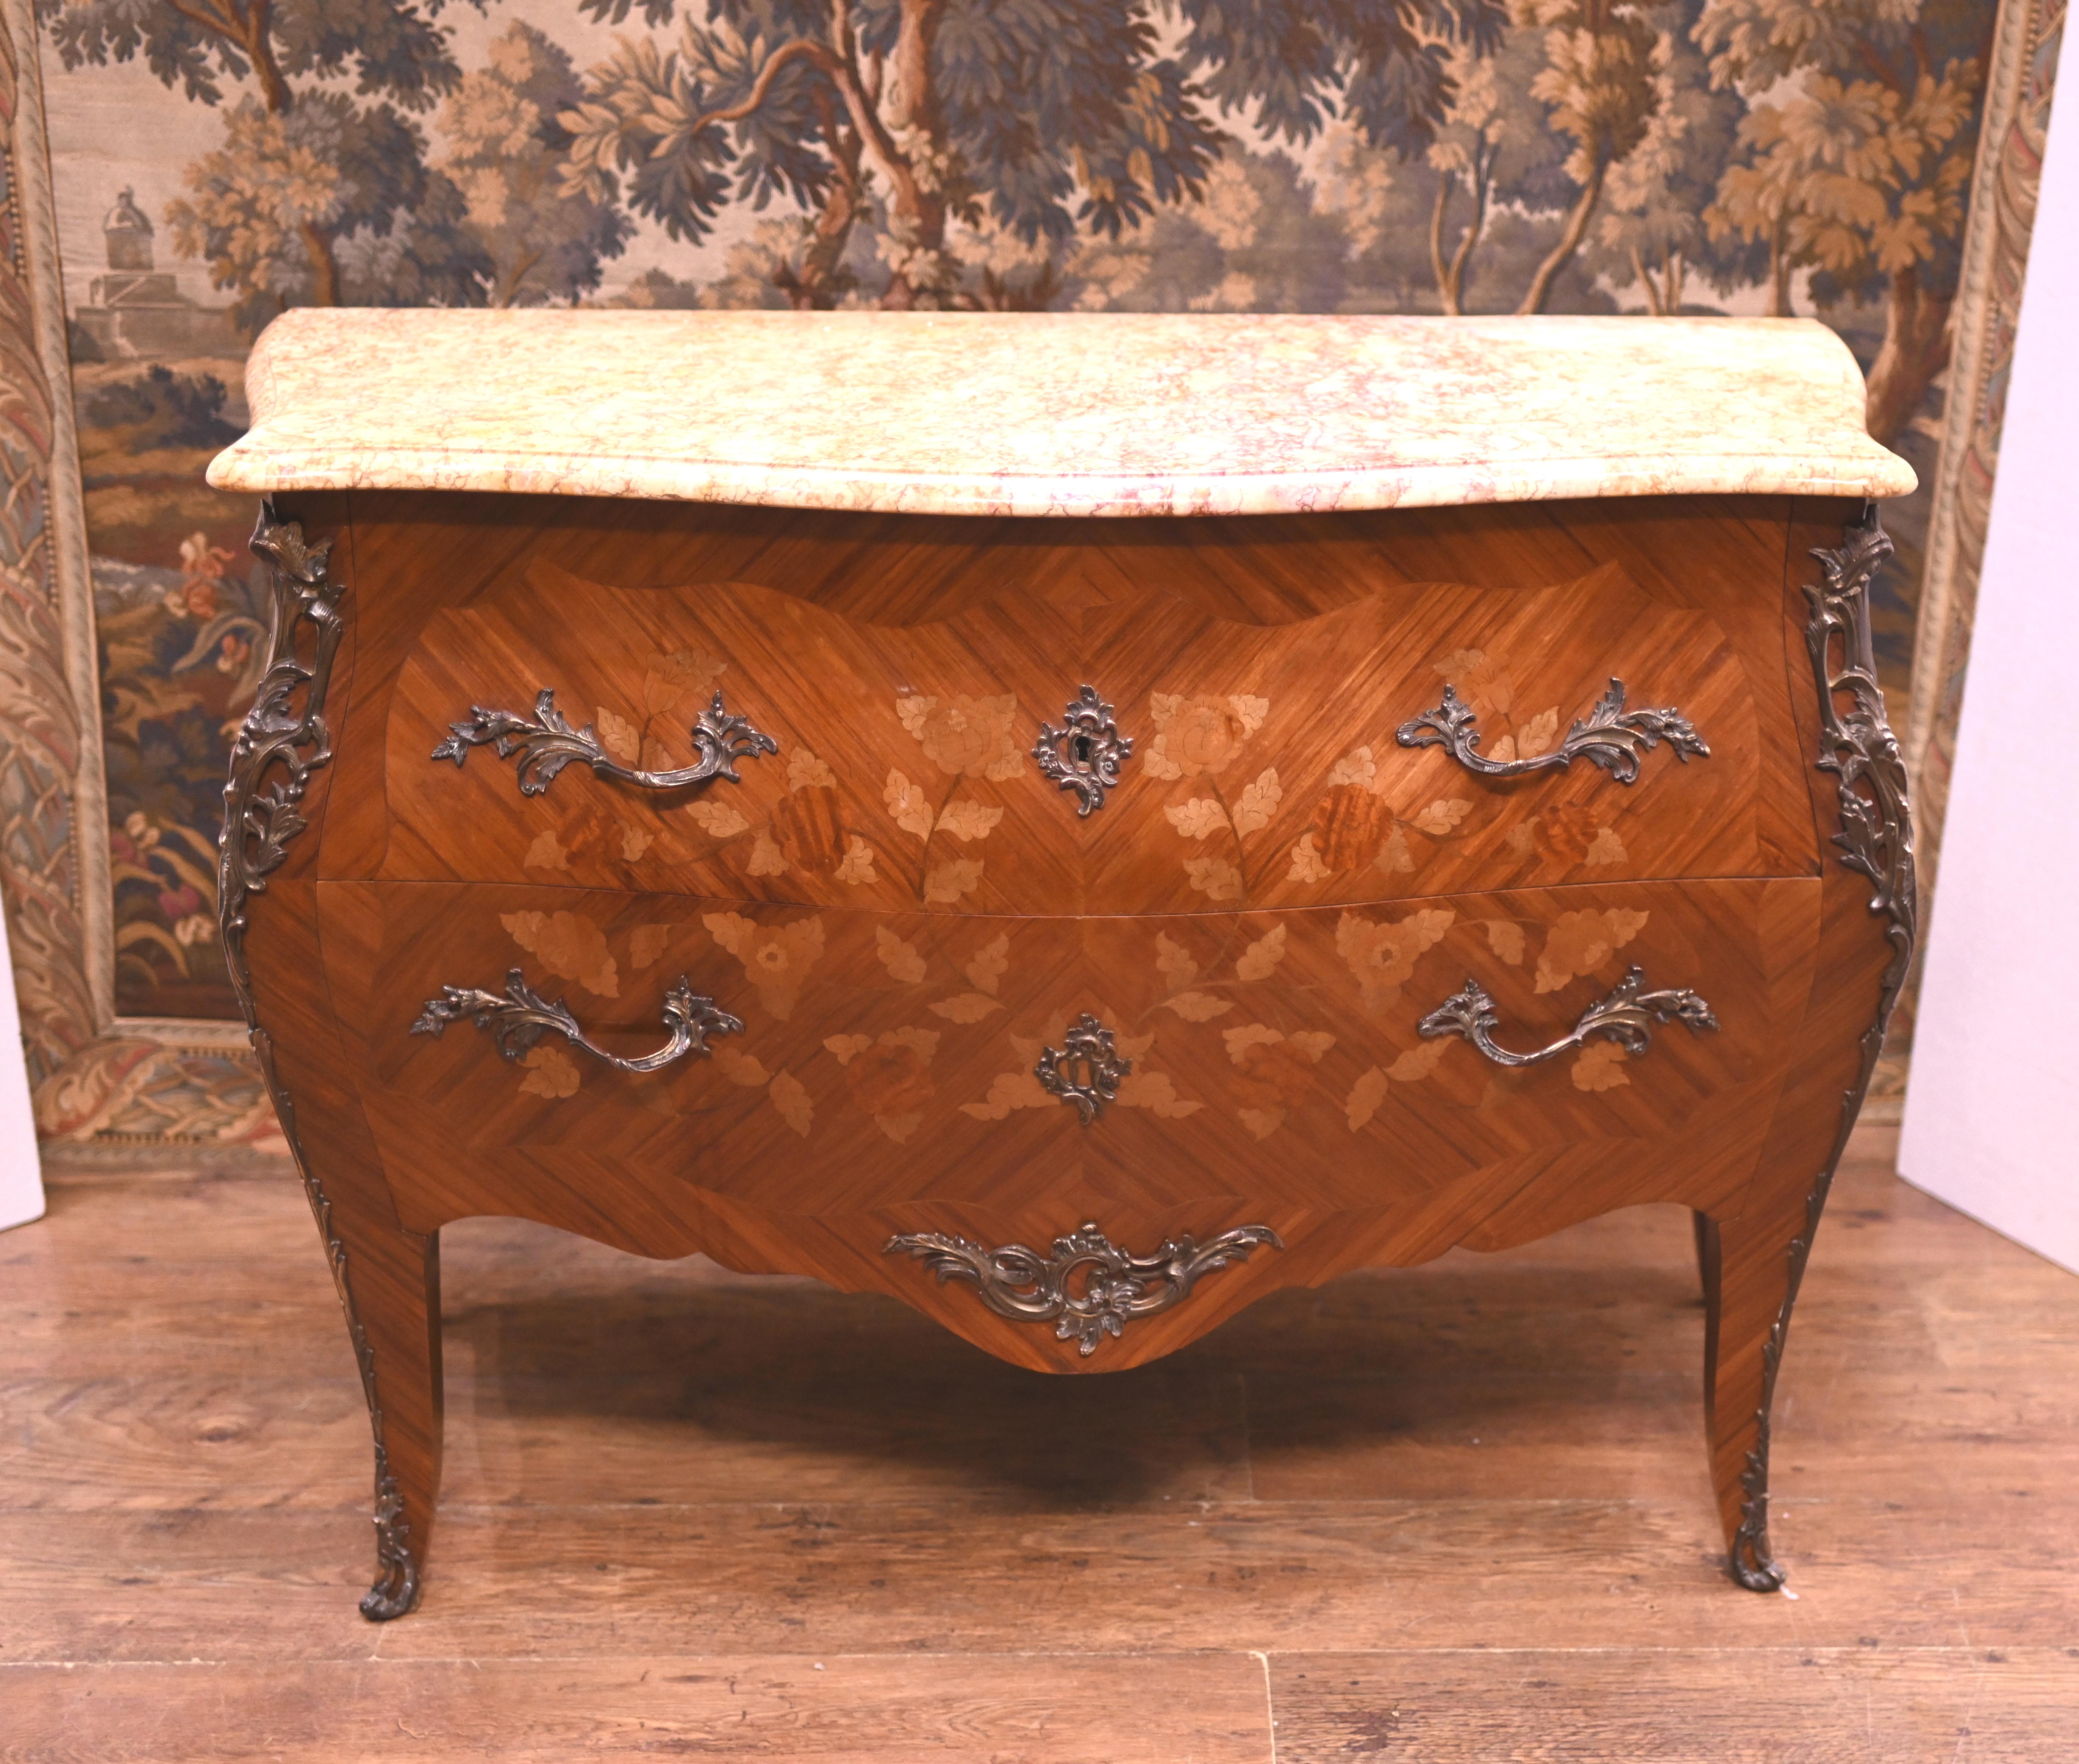 Refined French Empire commode - or chest of drawers - of bombe form
Two large drawers which feature intricate marquetry inlay to the front
Ormolu mounts are original and well cast
Marble top is smooth and chip free and the kingwood has a lovely